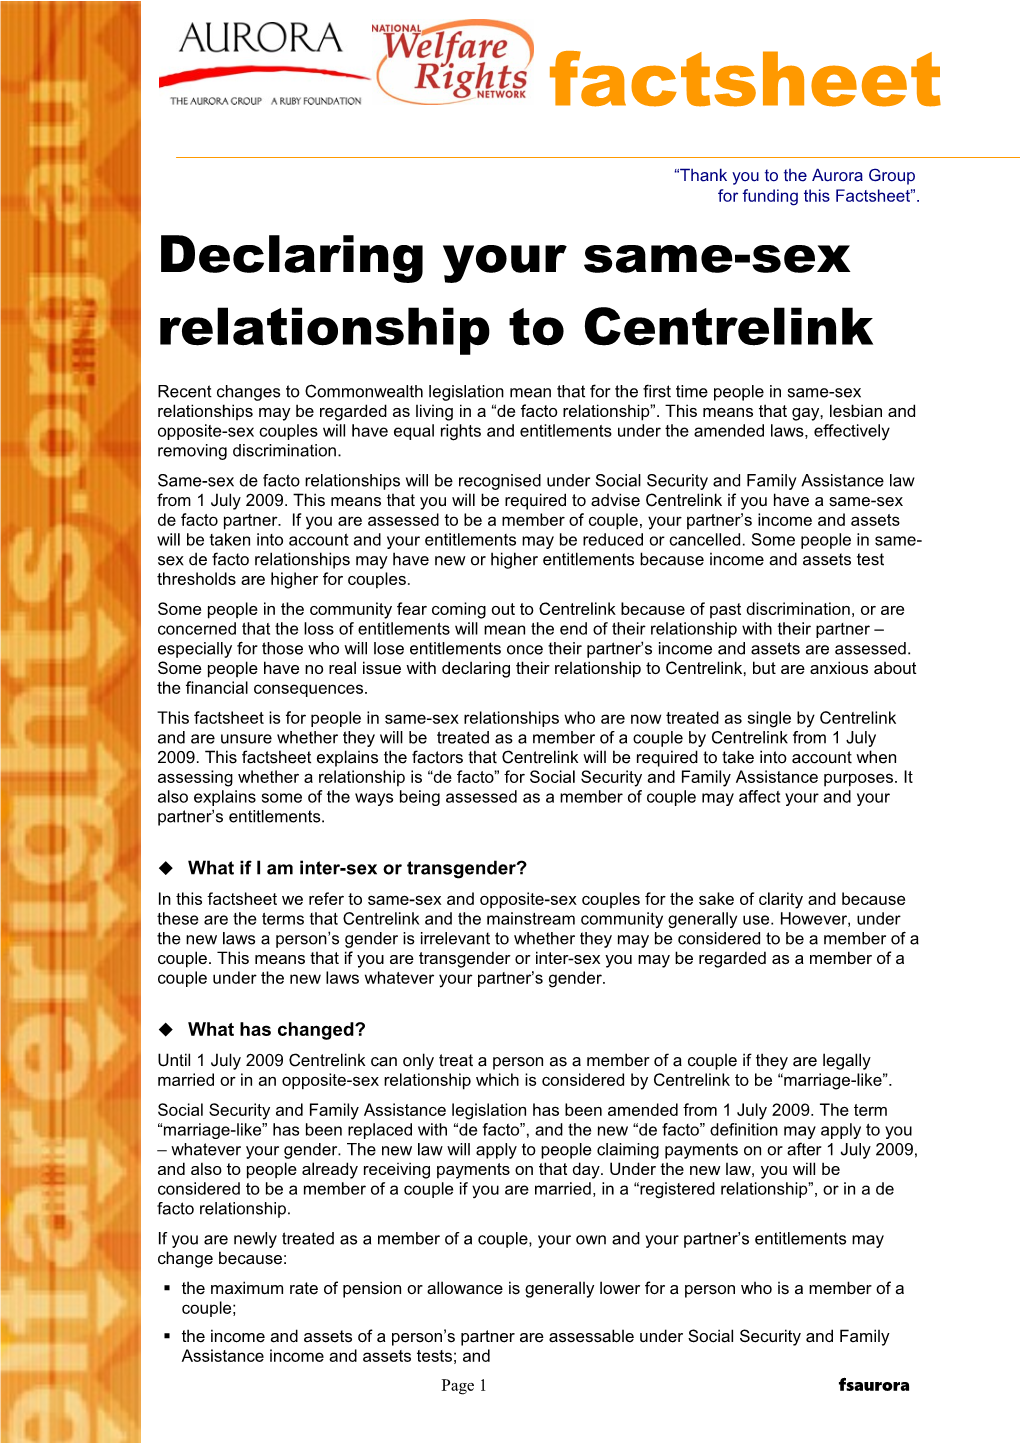 Declaring Your Same-Sex Relationship to Centrelink